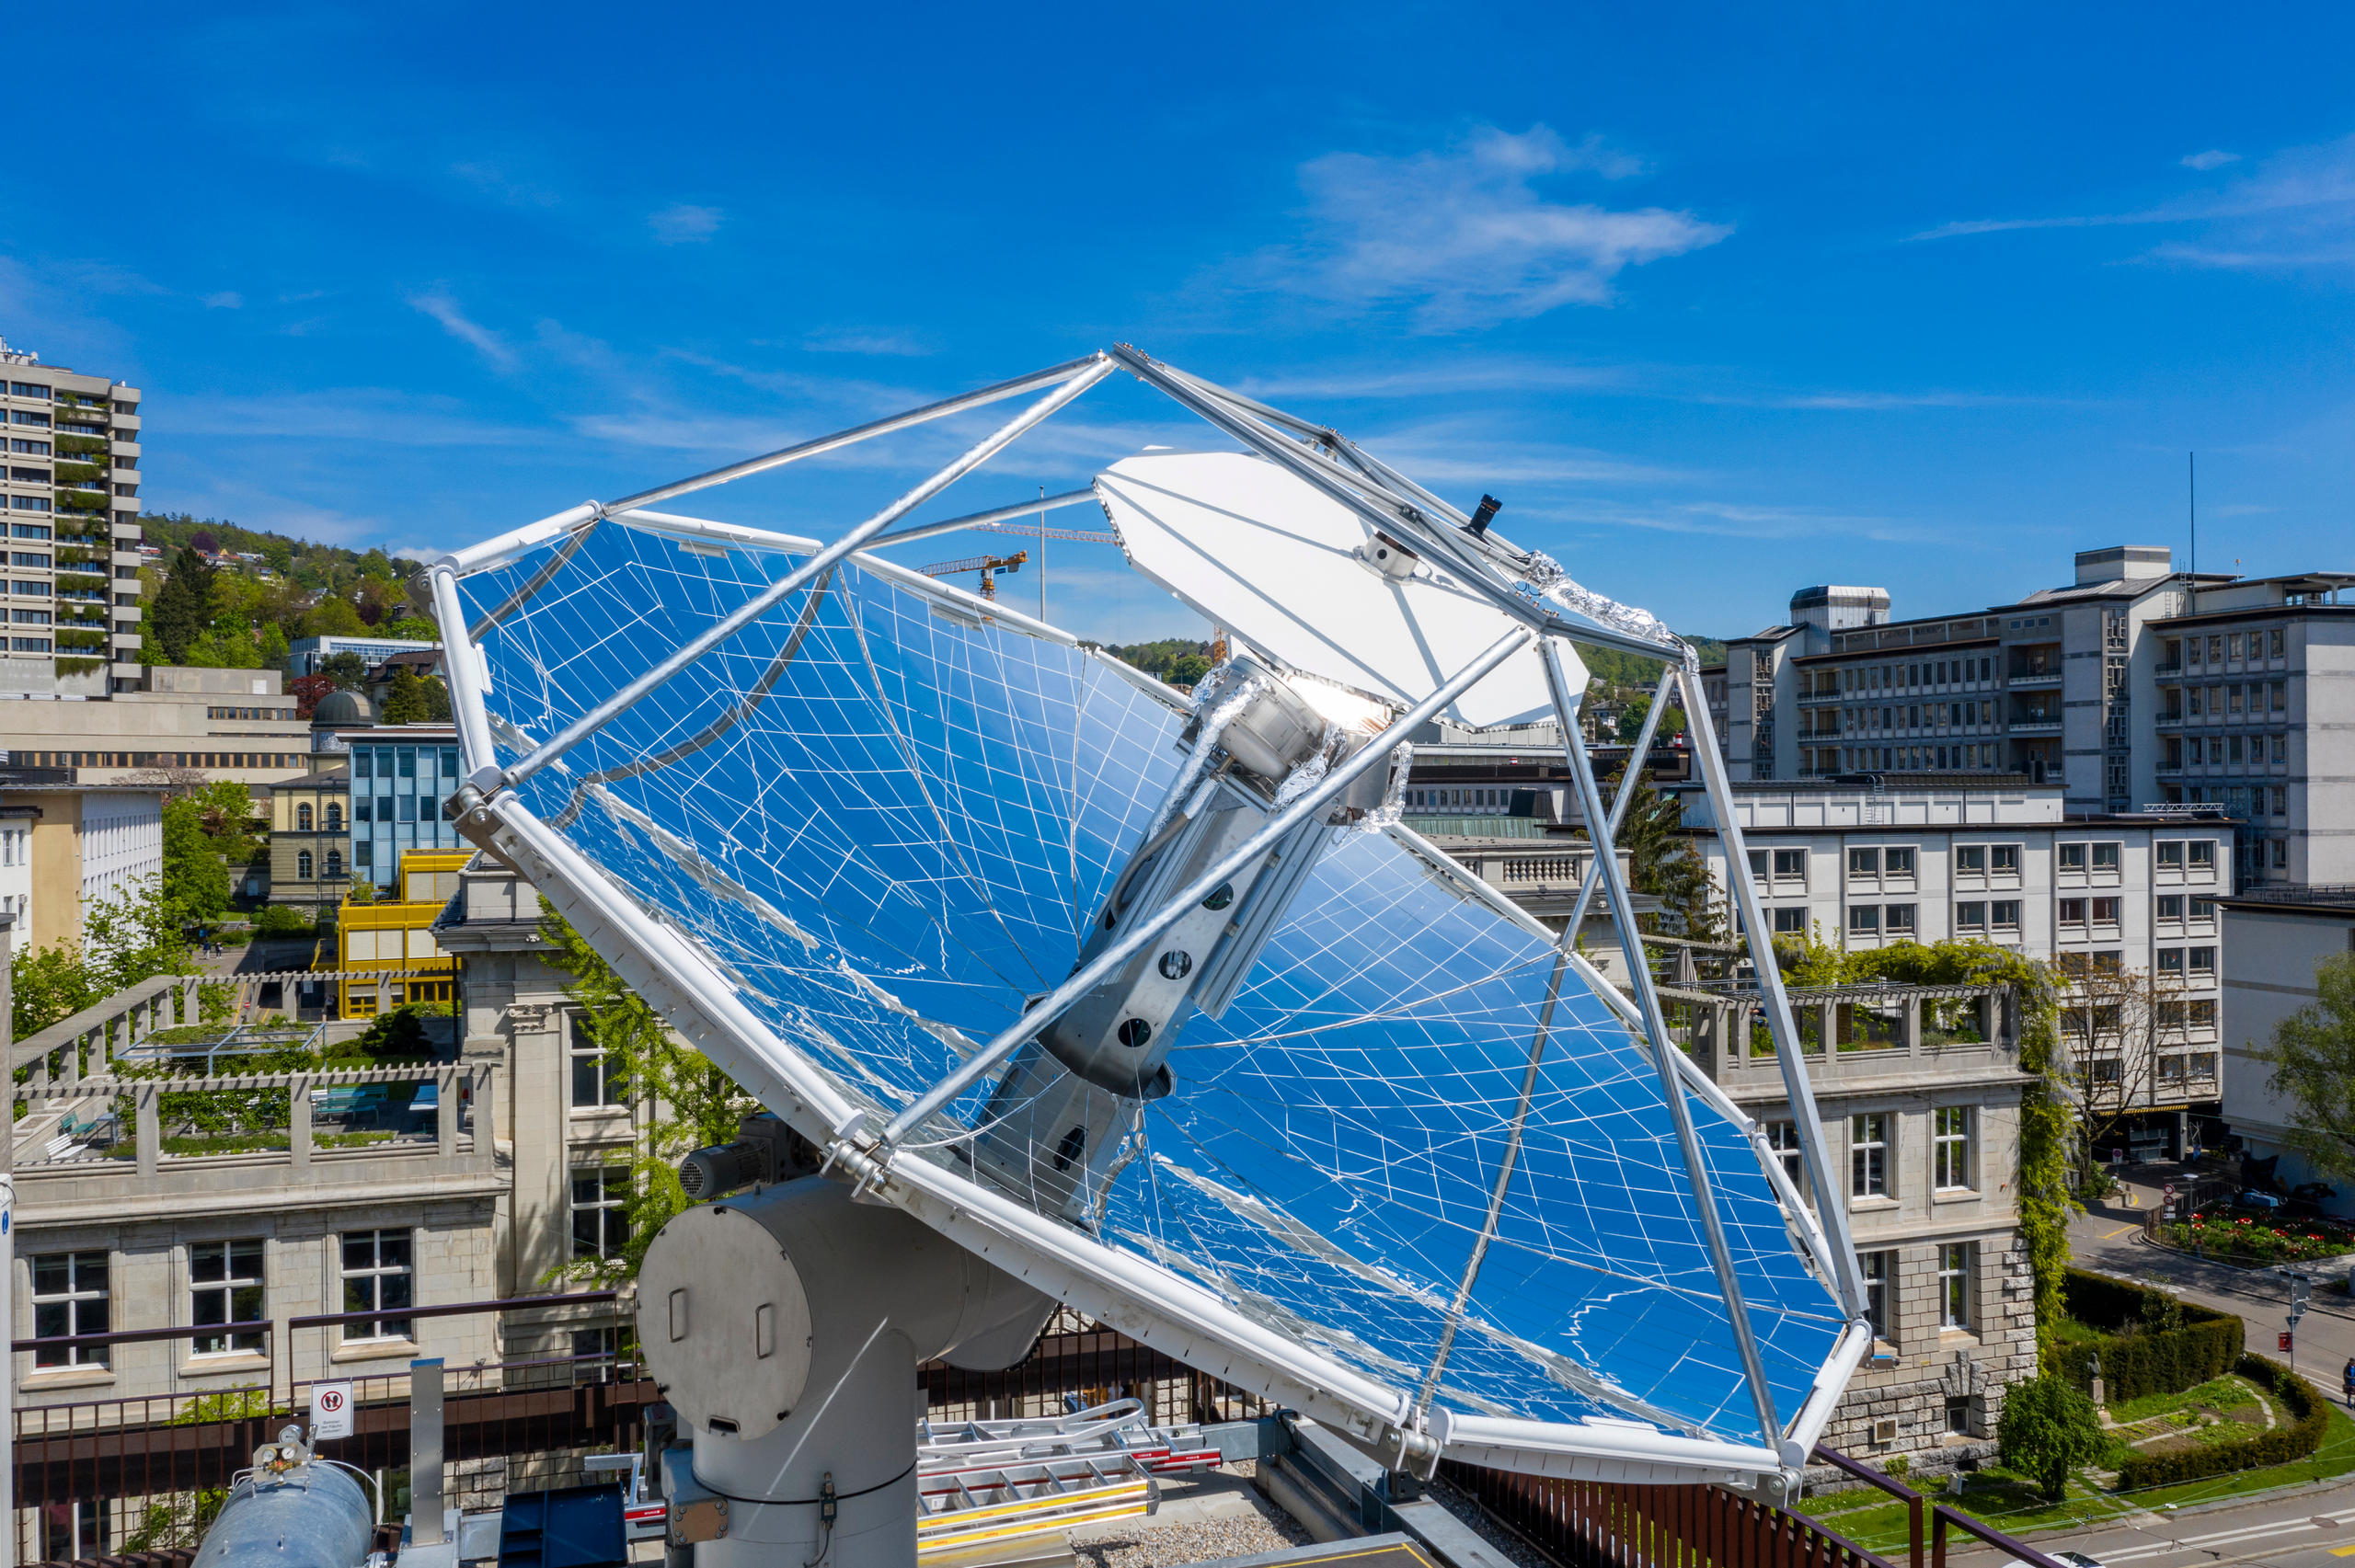 Solar mini-refinery on the roof of ETH Zurich university building.